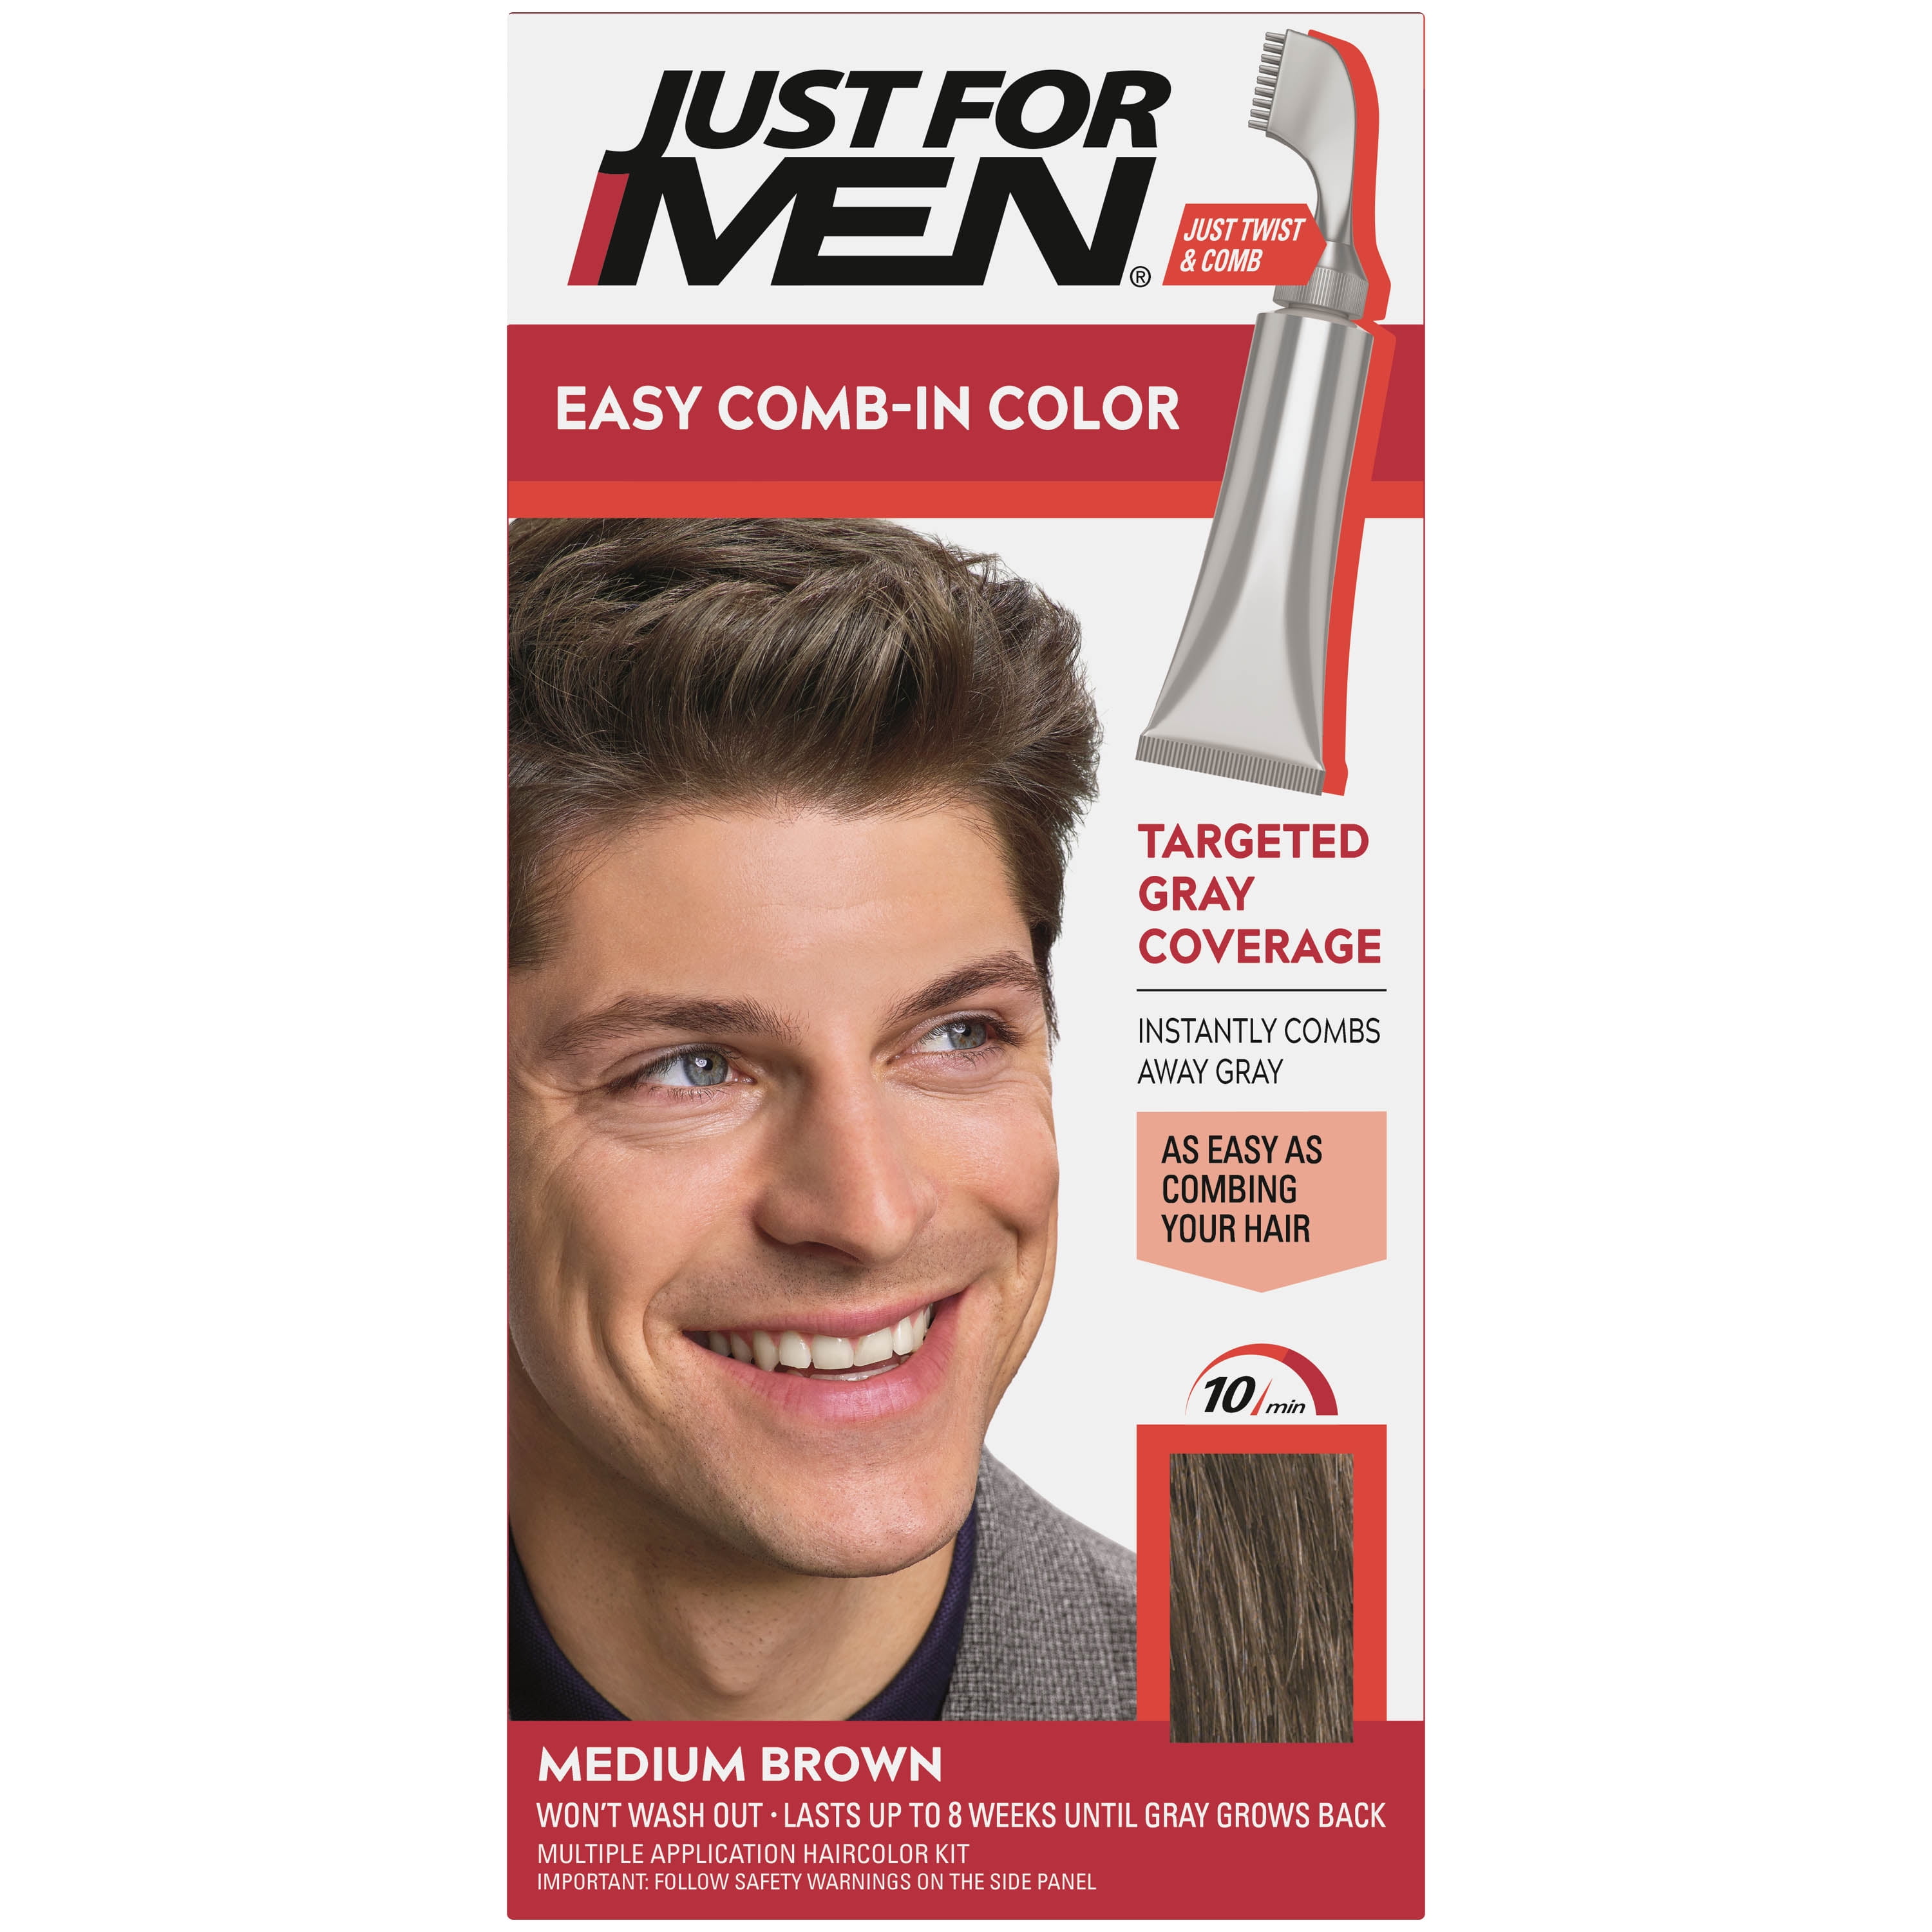 Just For Men Easy Comb-in Gray Hair Color with Applicator, Medium Brown, A-35